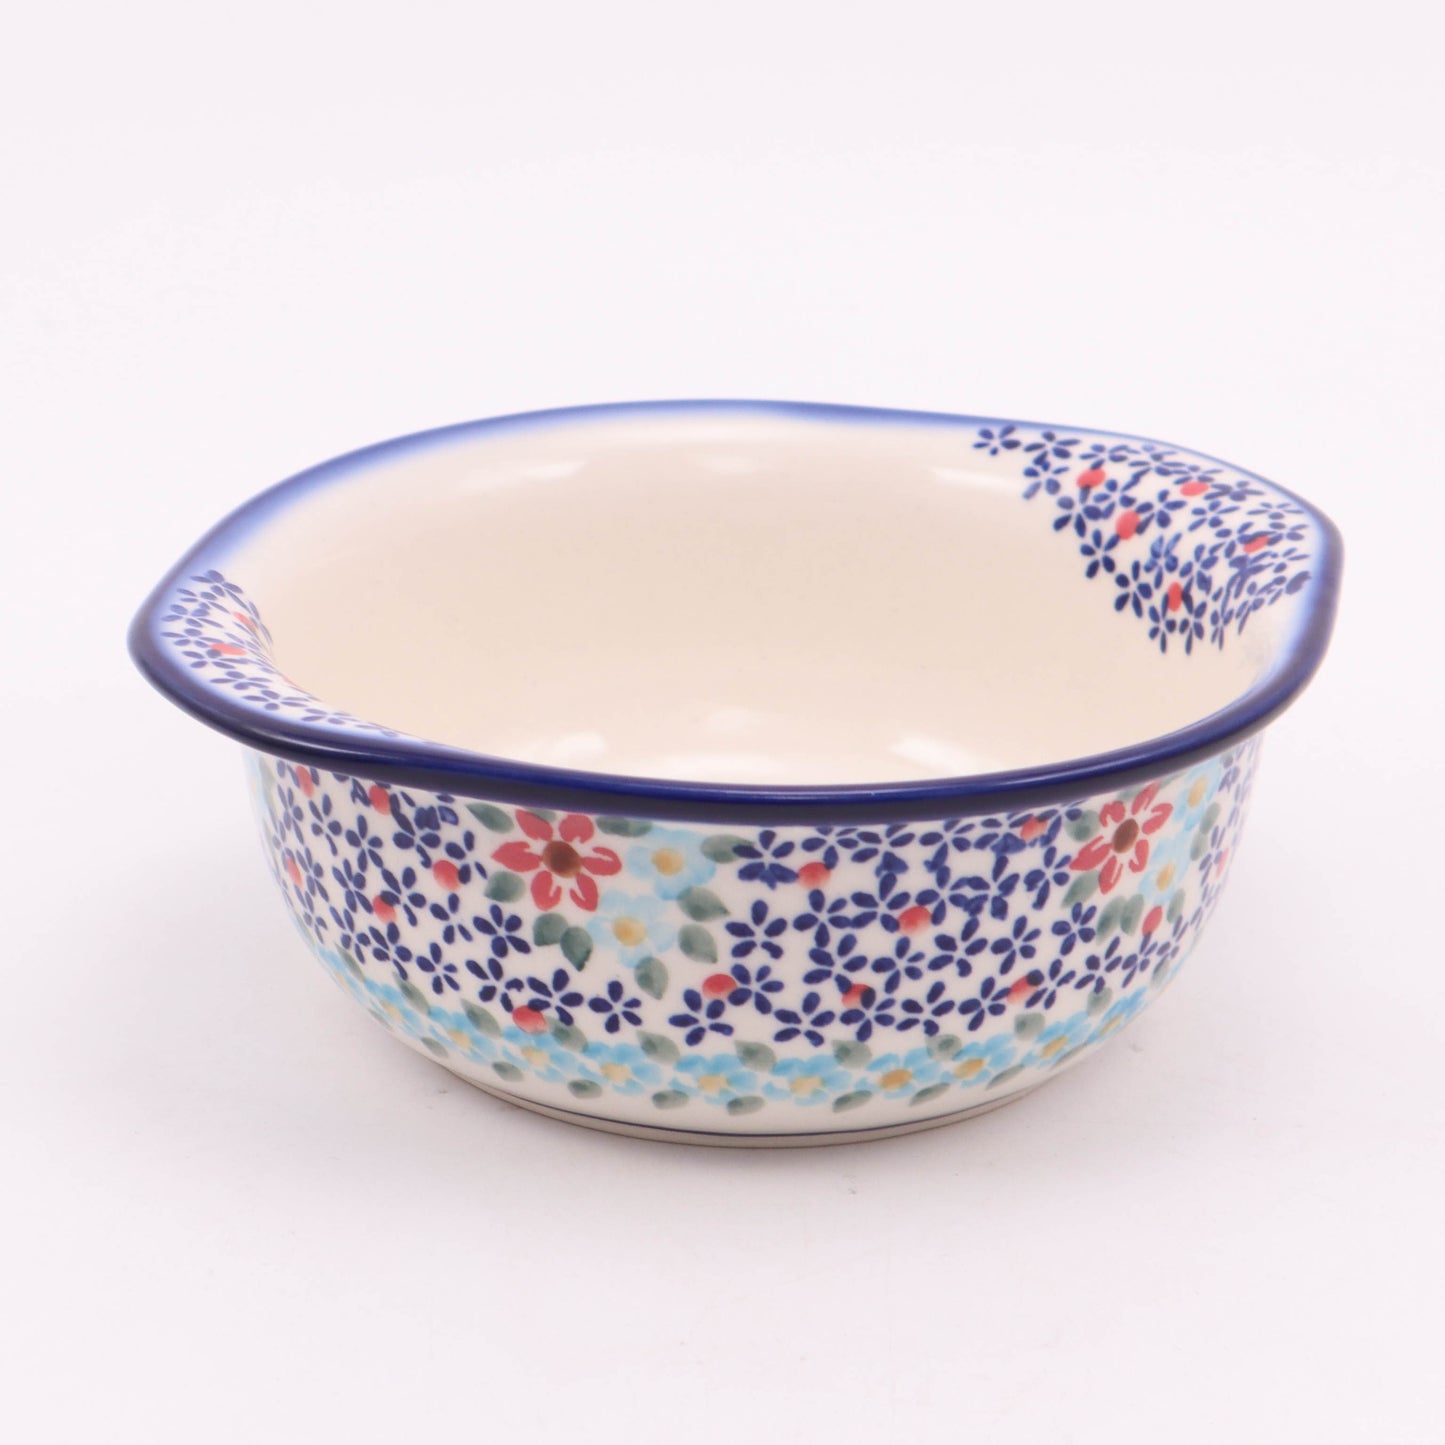 6.5" Soup Bowl with Handles. Pattern: Dainty Petals